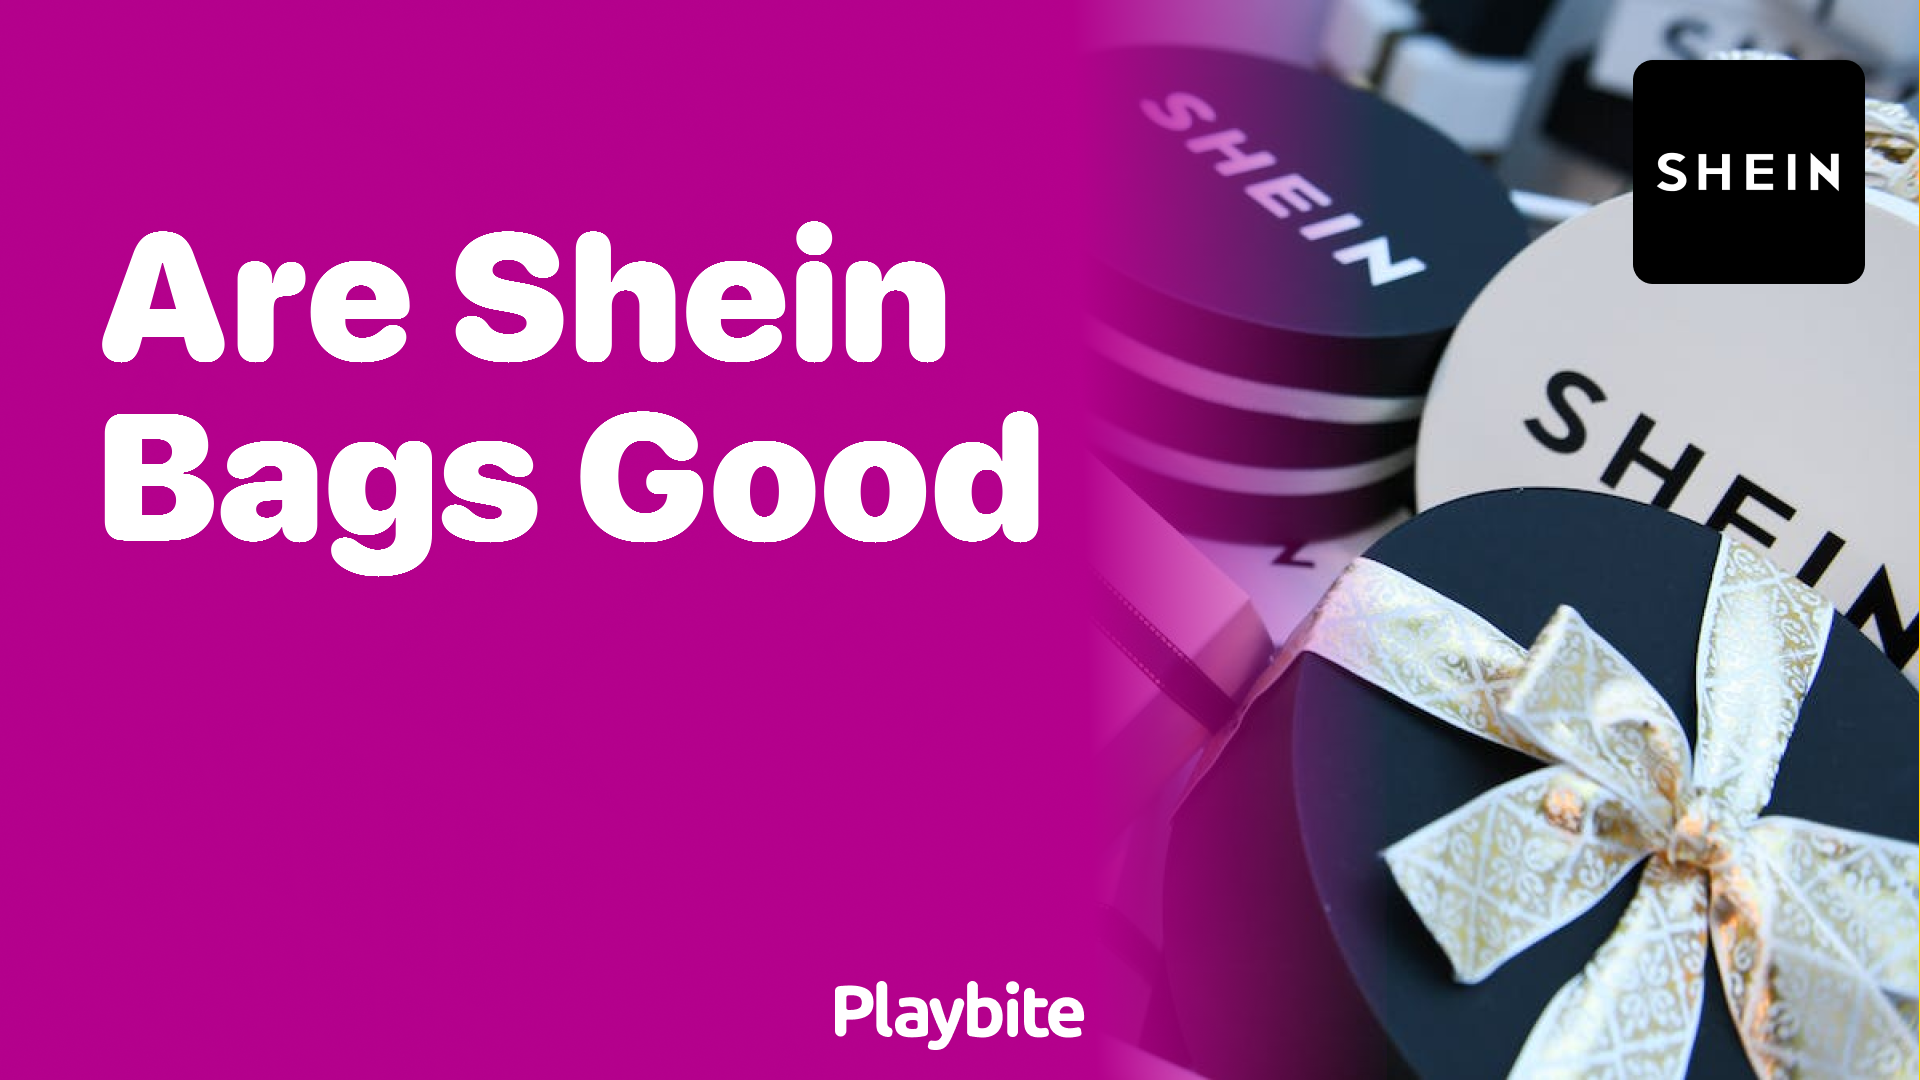 Is SHEIN a Good Website for Plus Size Clothing? - Playbite